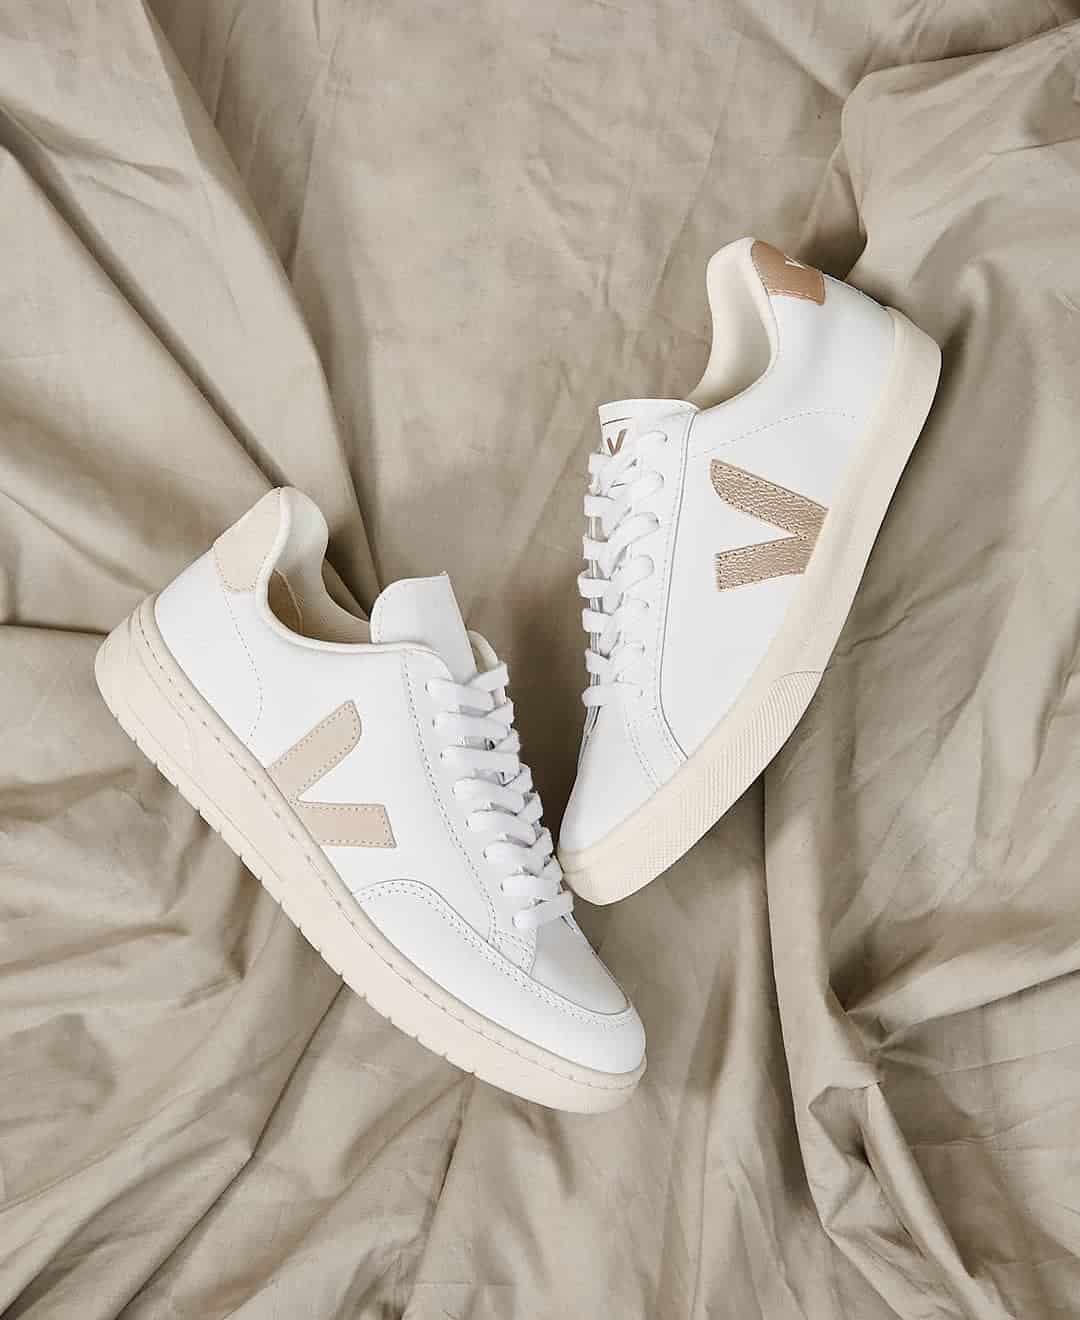 Veja Sneakers to wear to work